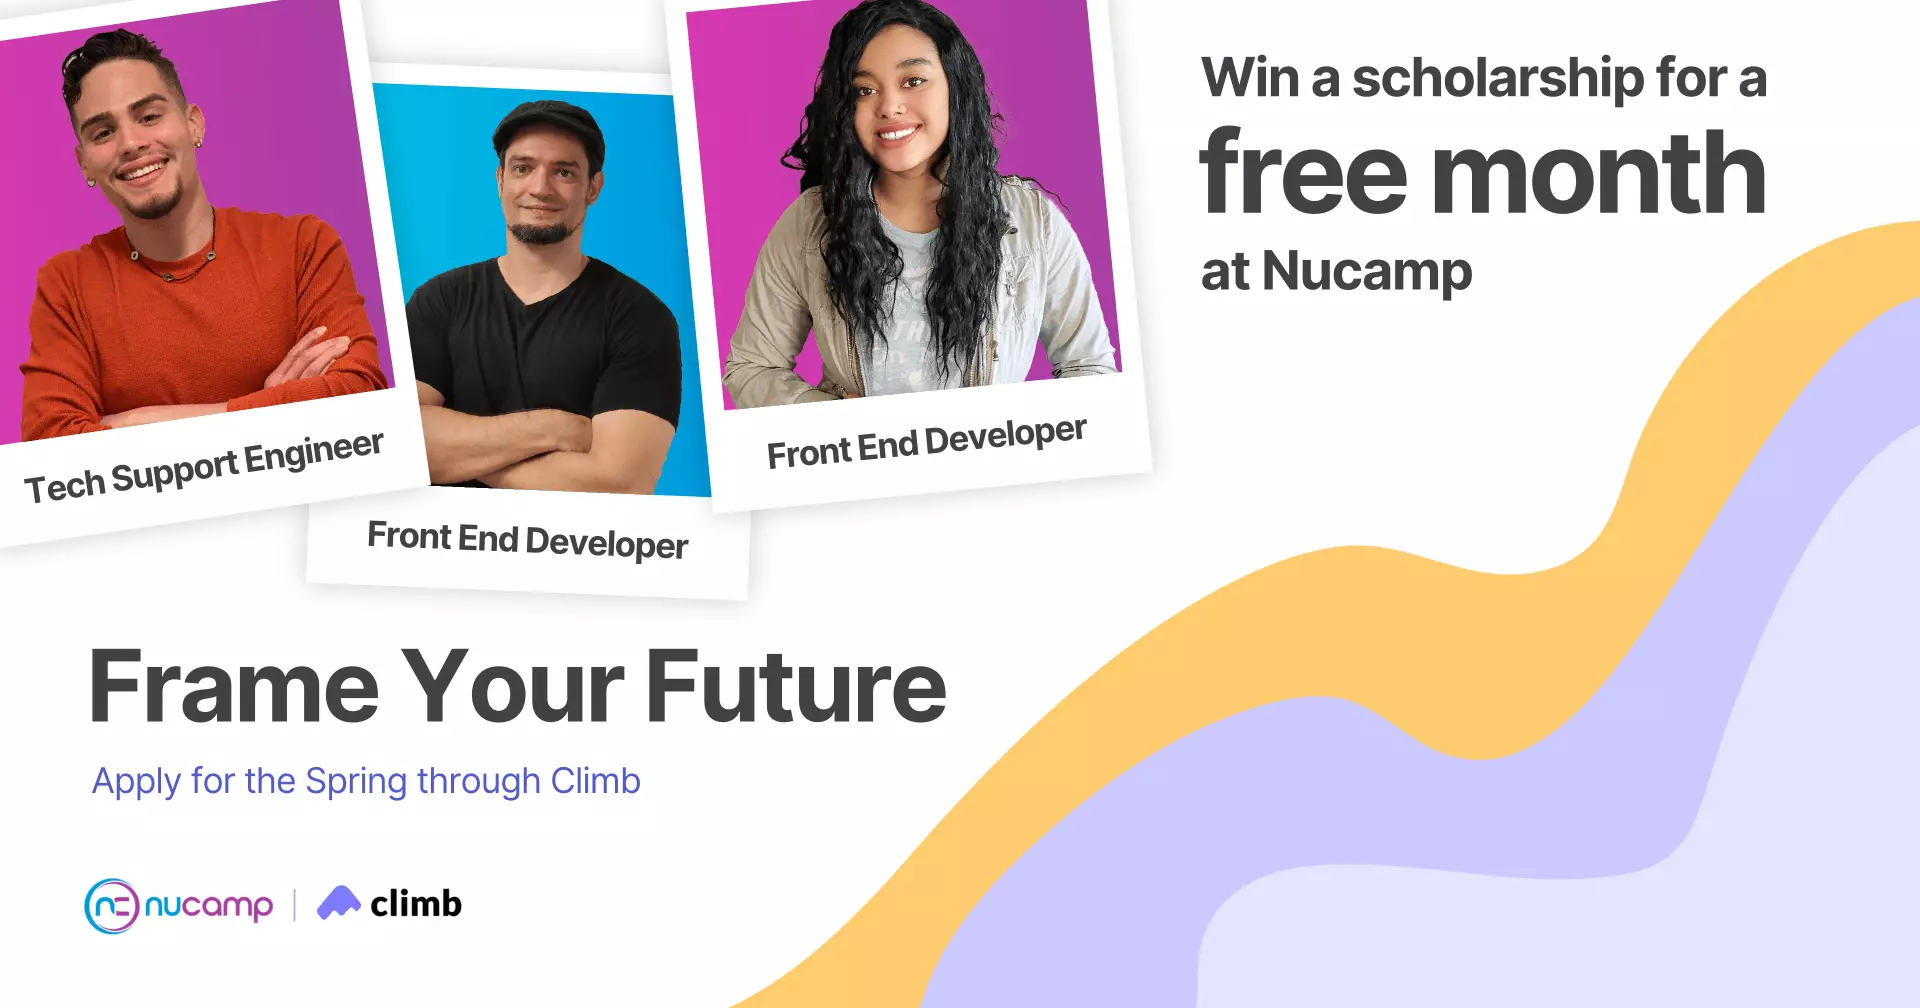 Spend 10 minutes to Frame Your Future and win a FREE month at Nucamp coding bootcamp